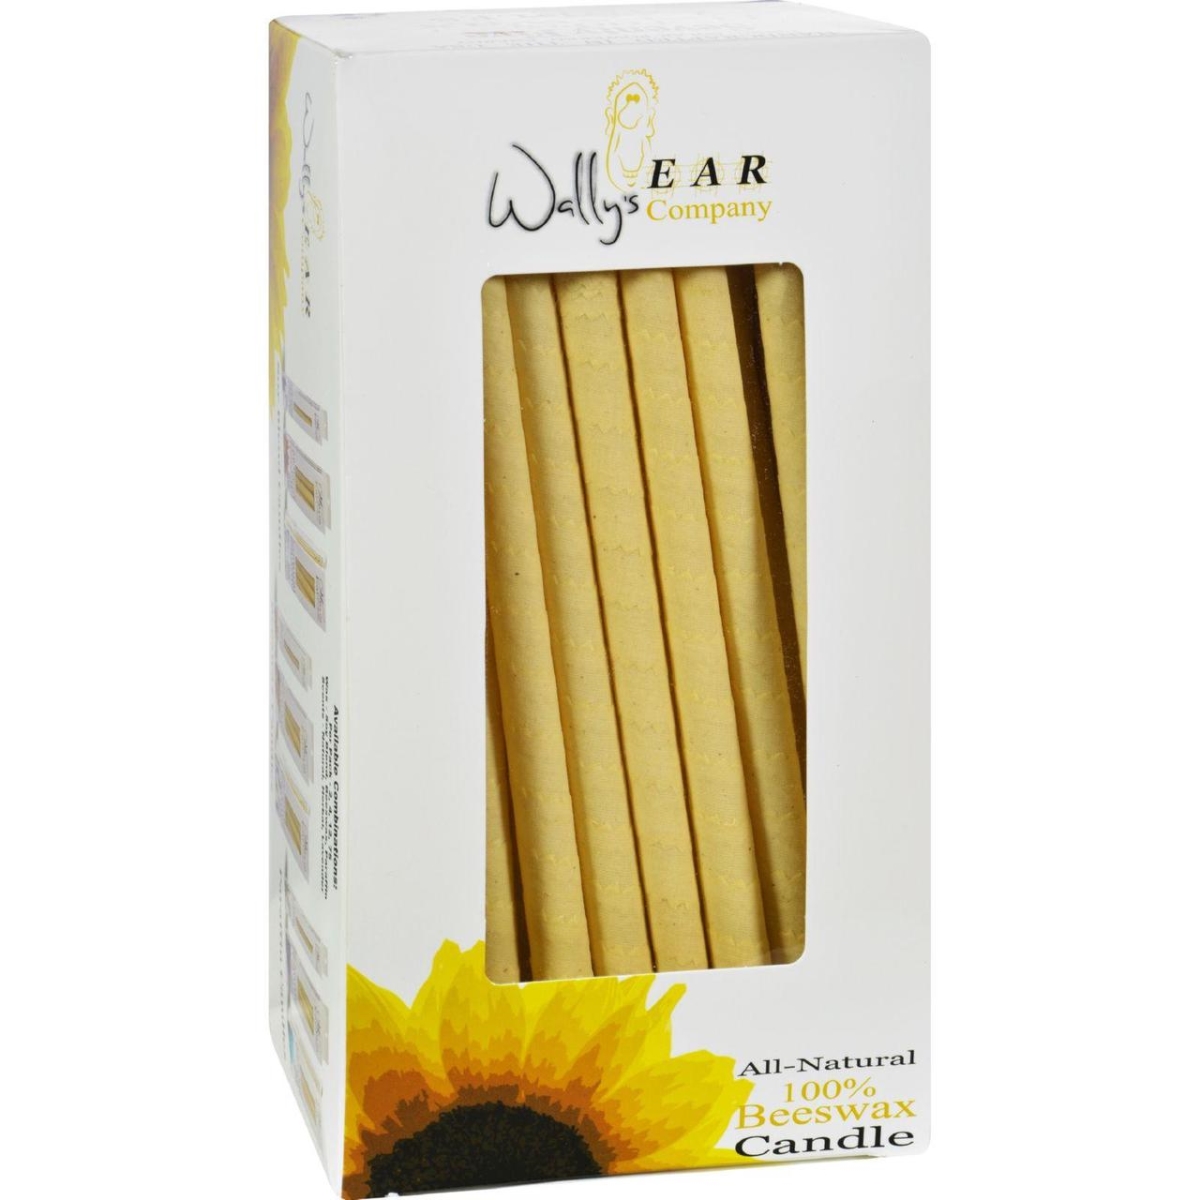 Hg0321935 100 Percent Beeswax Candles - Case Of 75